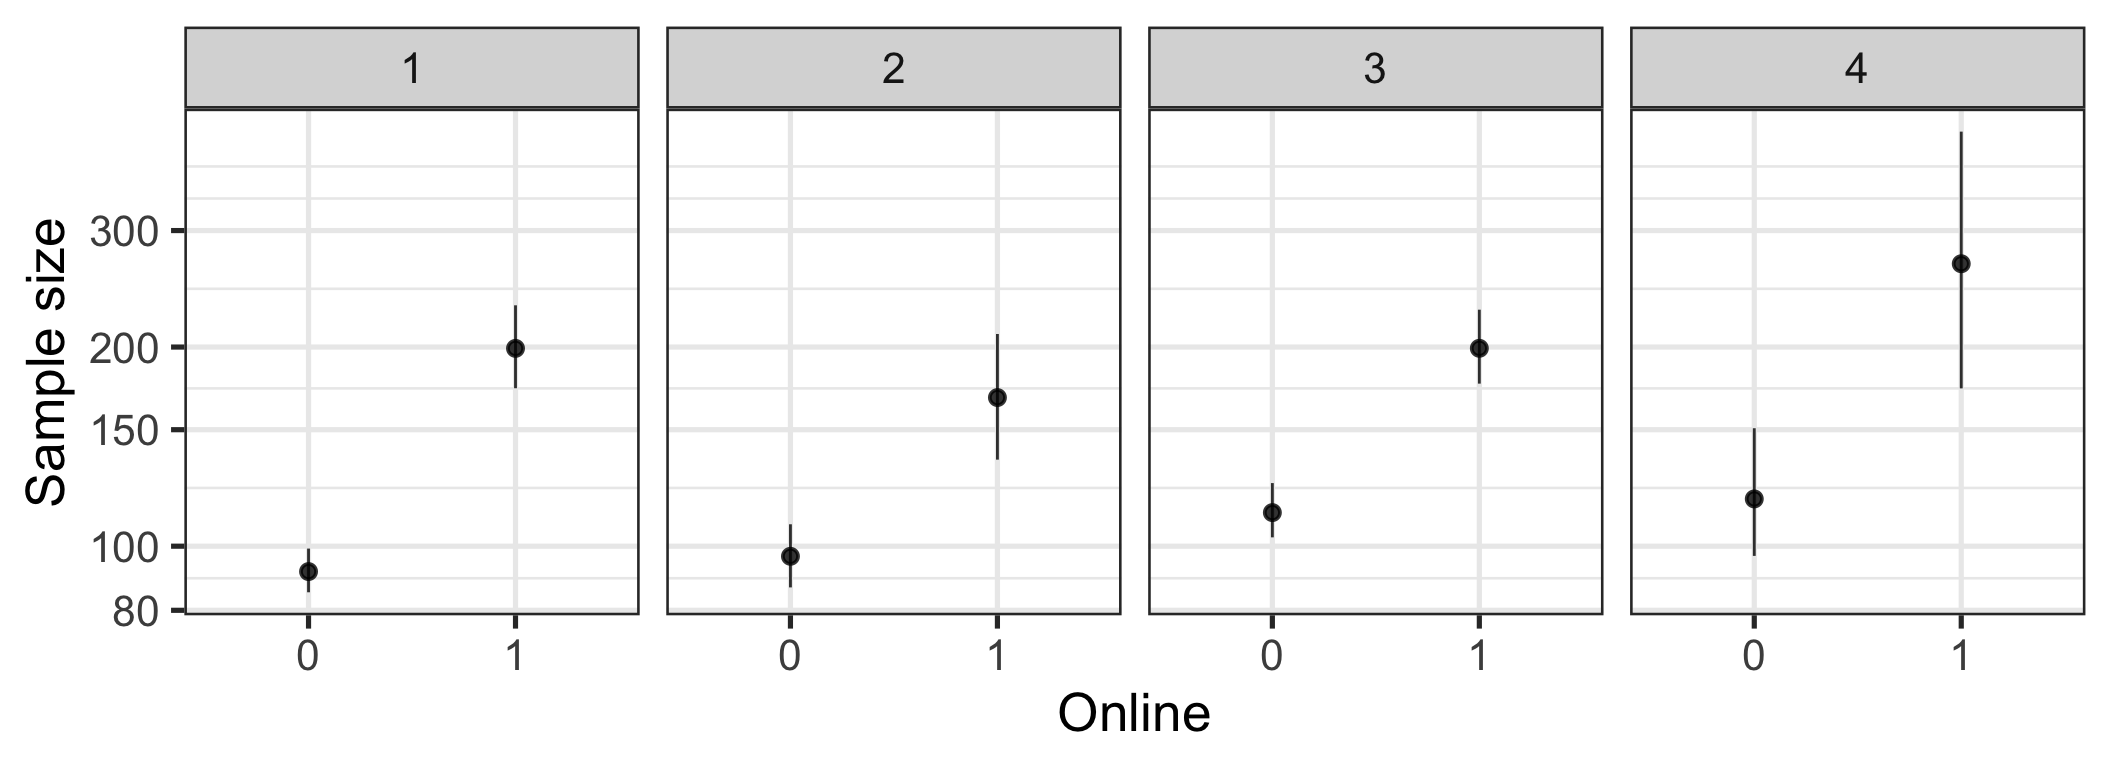 Sample size by online. Bootstrapped means and 95% CIs.